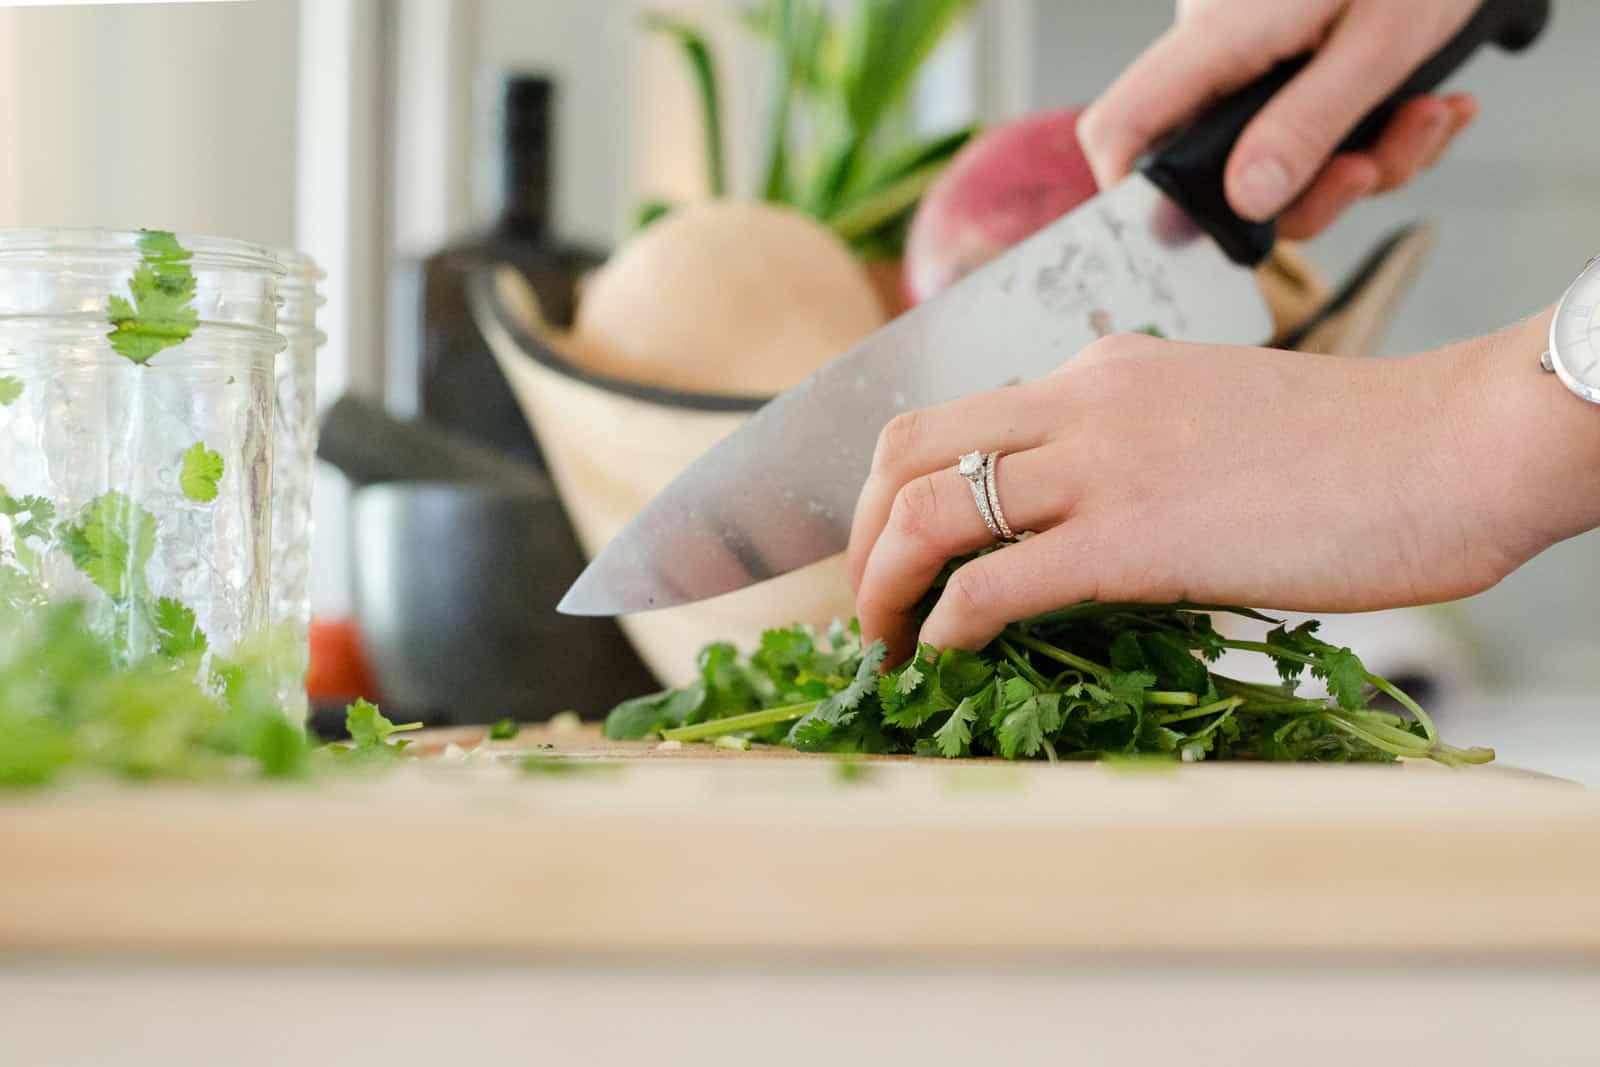 Here’s How You Can Finally Learn To Cook At Home And Stop Ordering Delivery